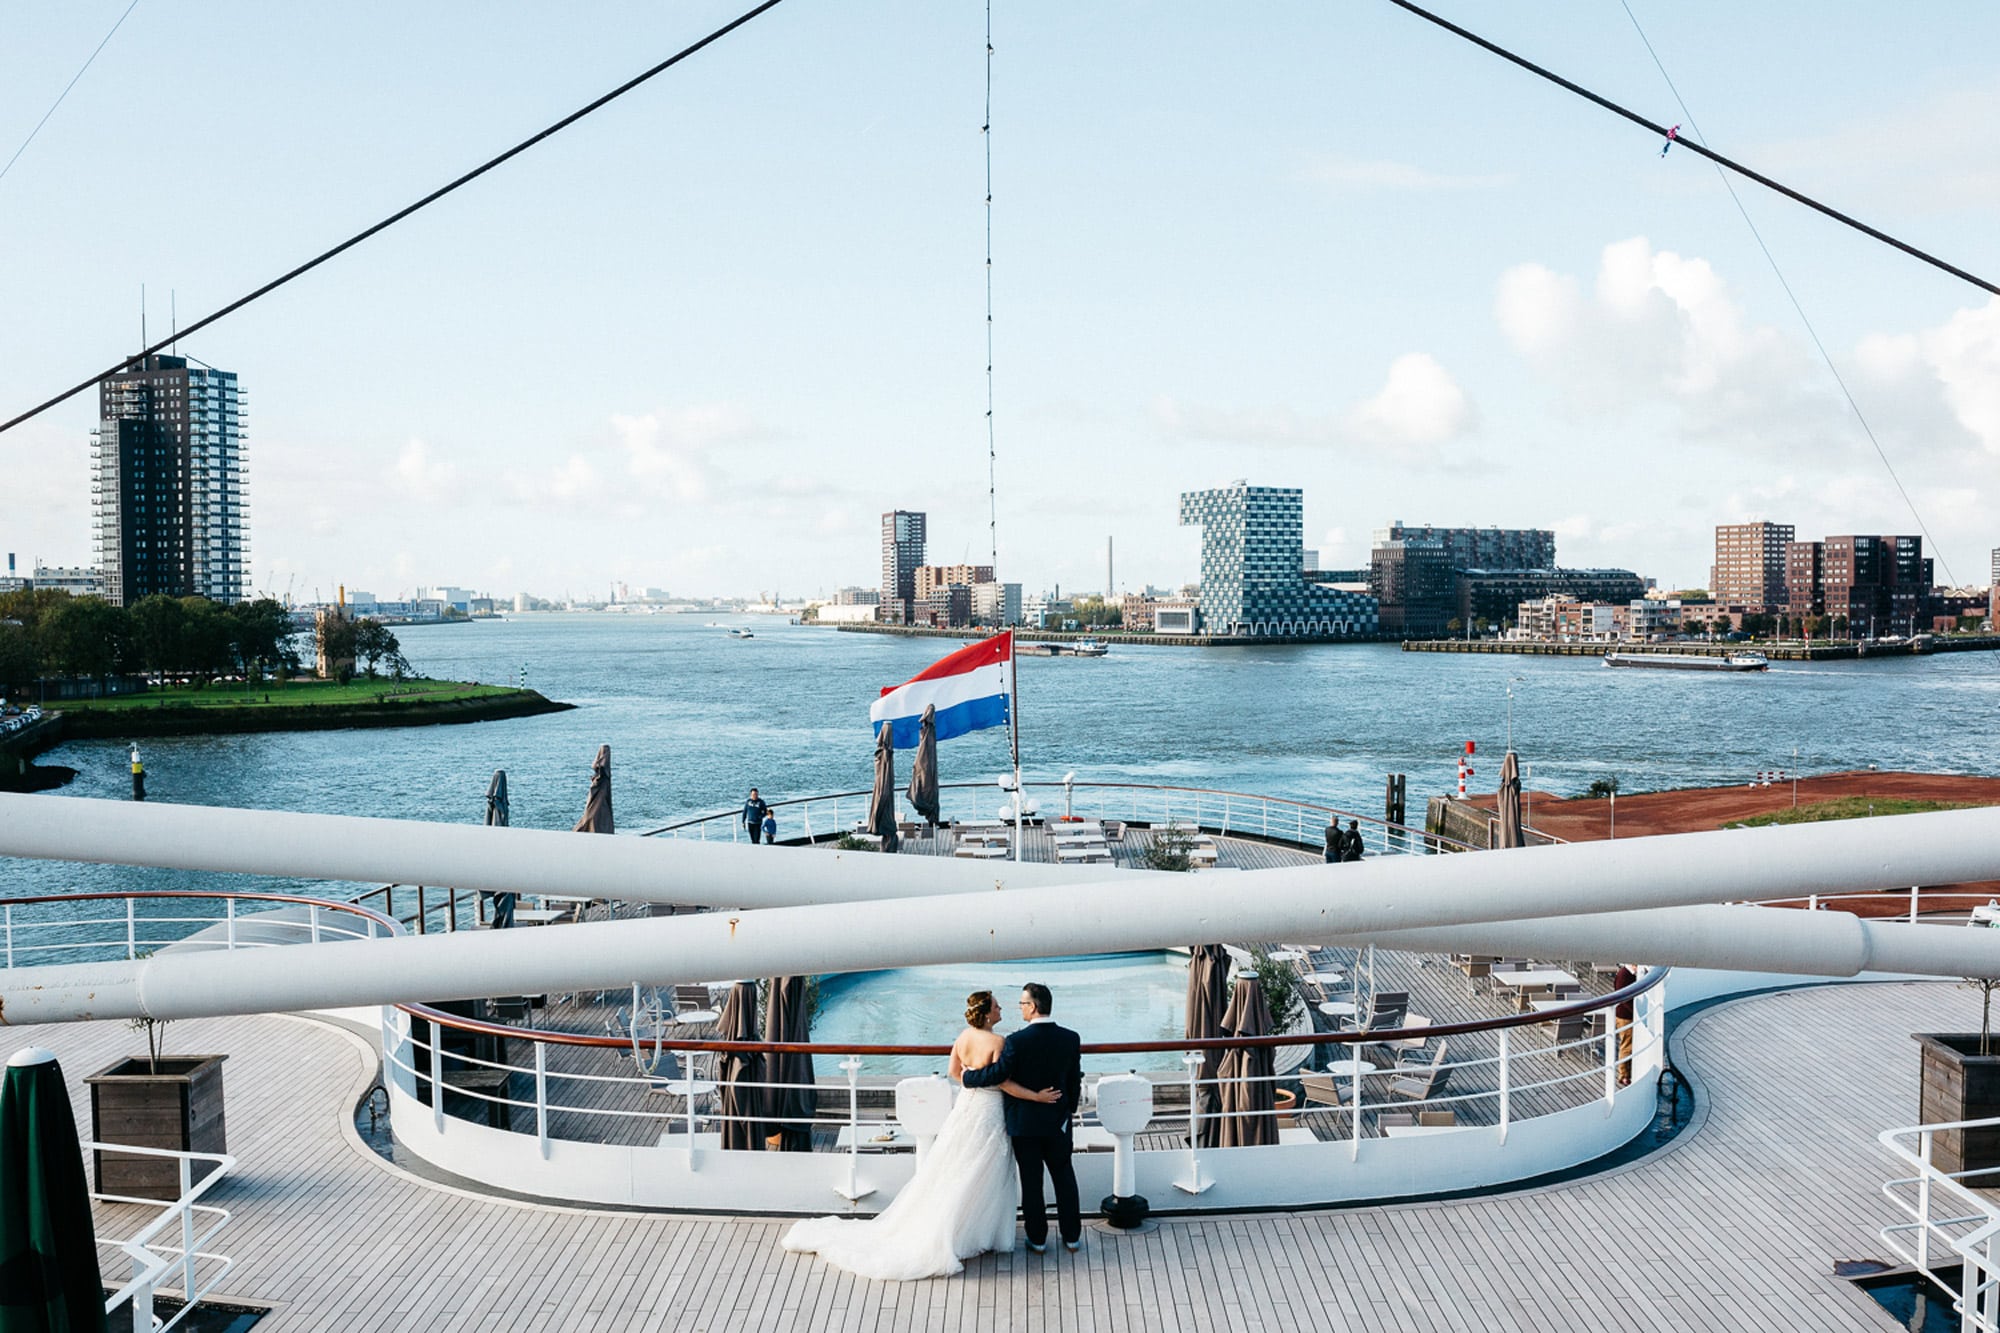 Getting married in Rotterdam - A bride and groom stand on the deck of a cruise ship.